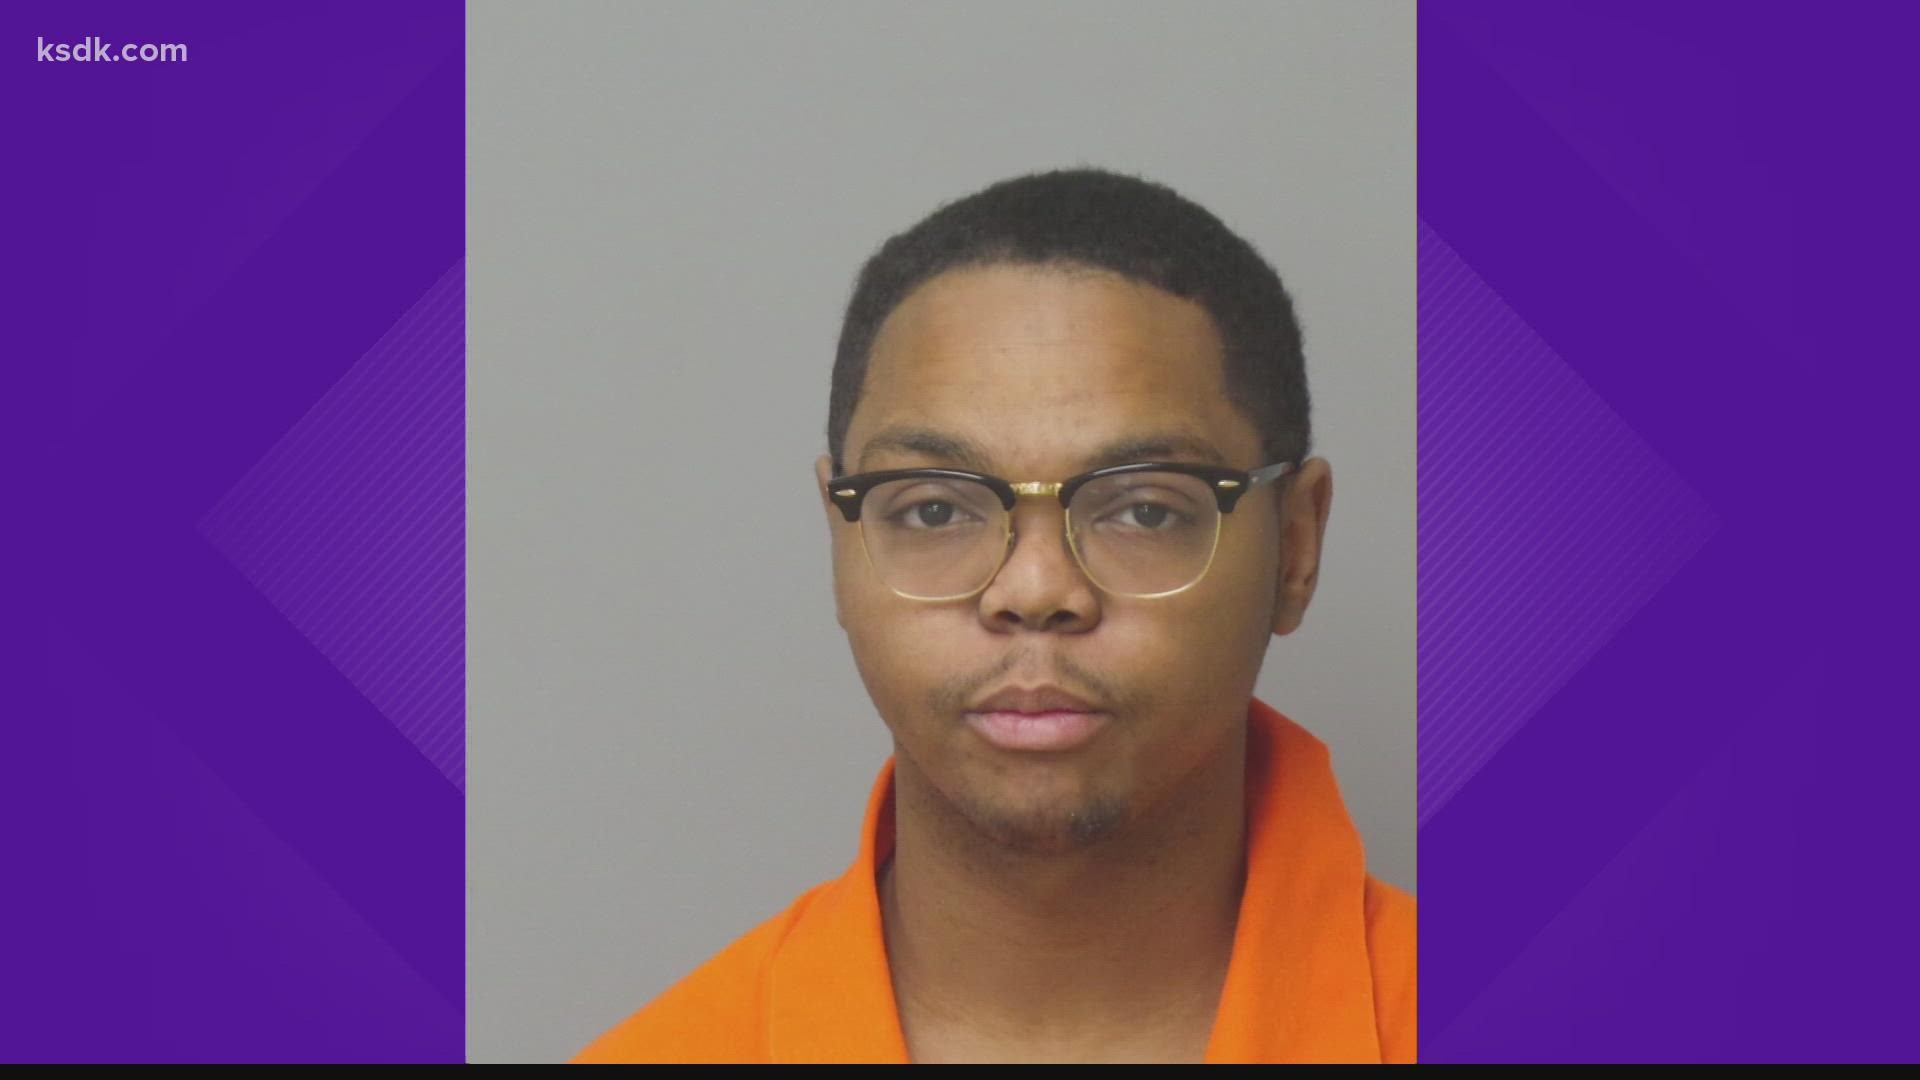 Tylan Tunstall is behind bars and charged with fourth-degree child molestation, a felony.